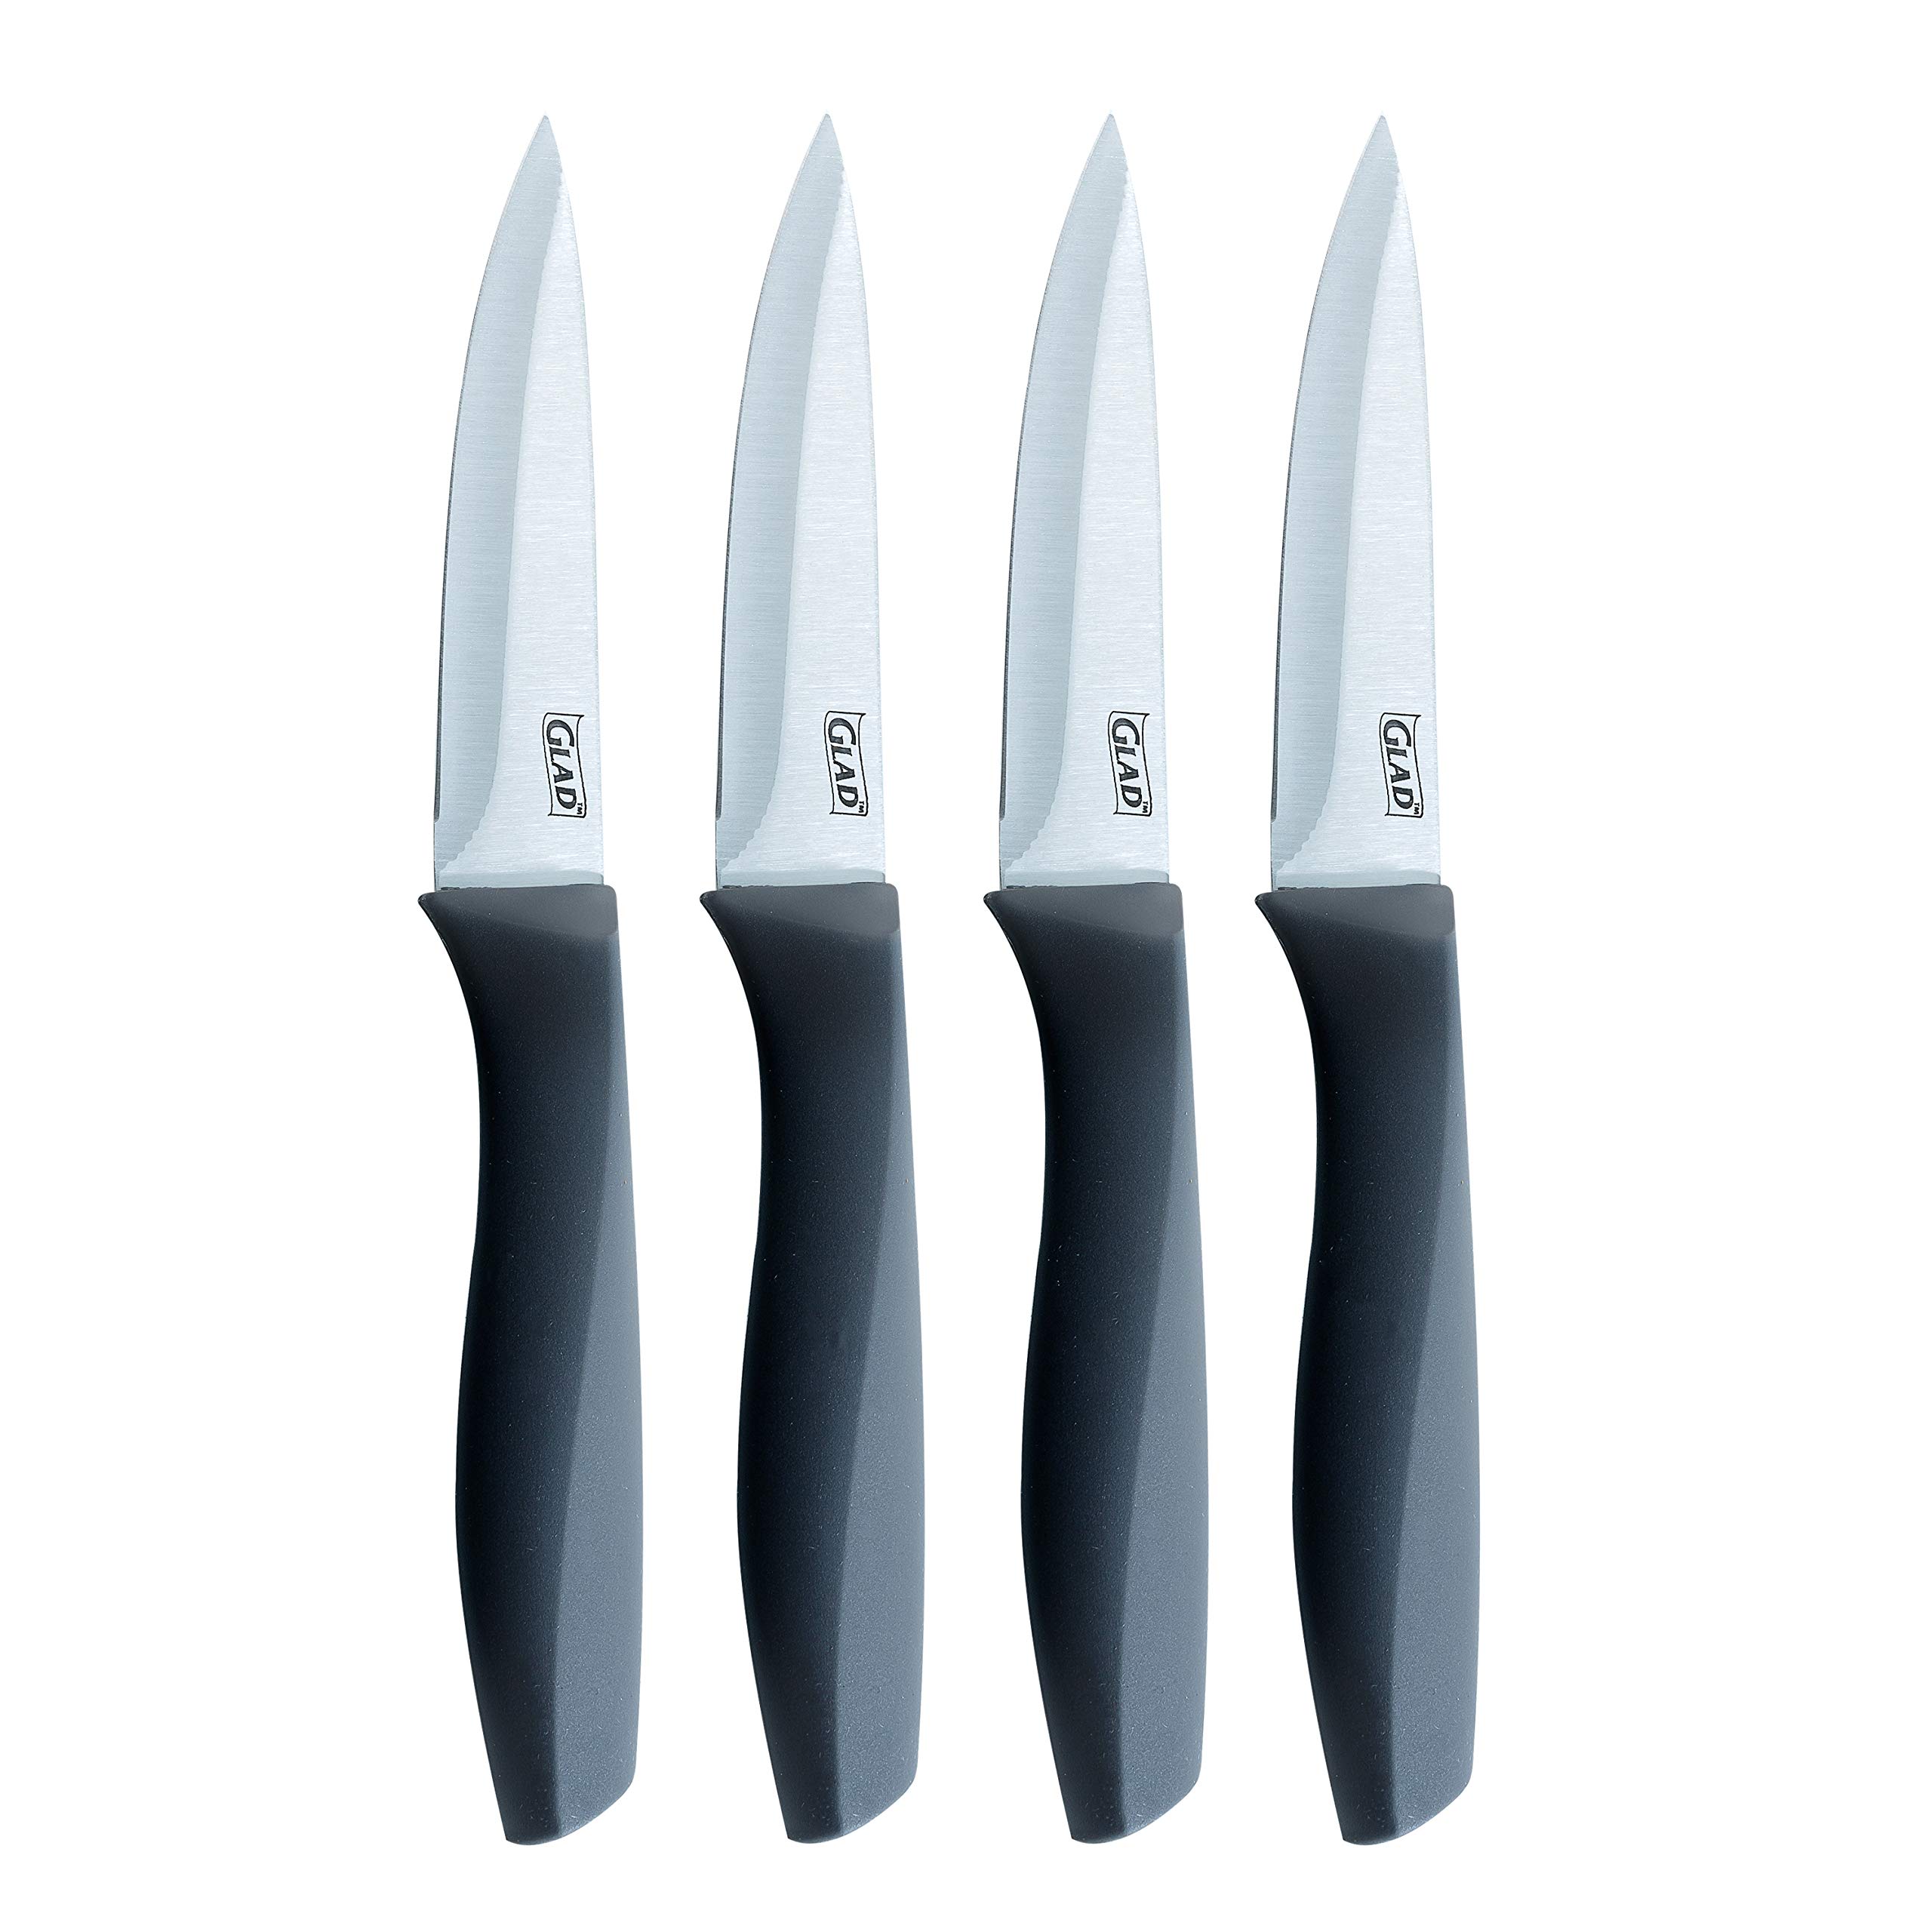 Choosing The Best Steel For A Paring Knife